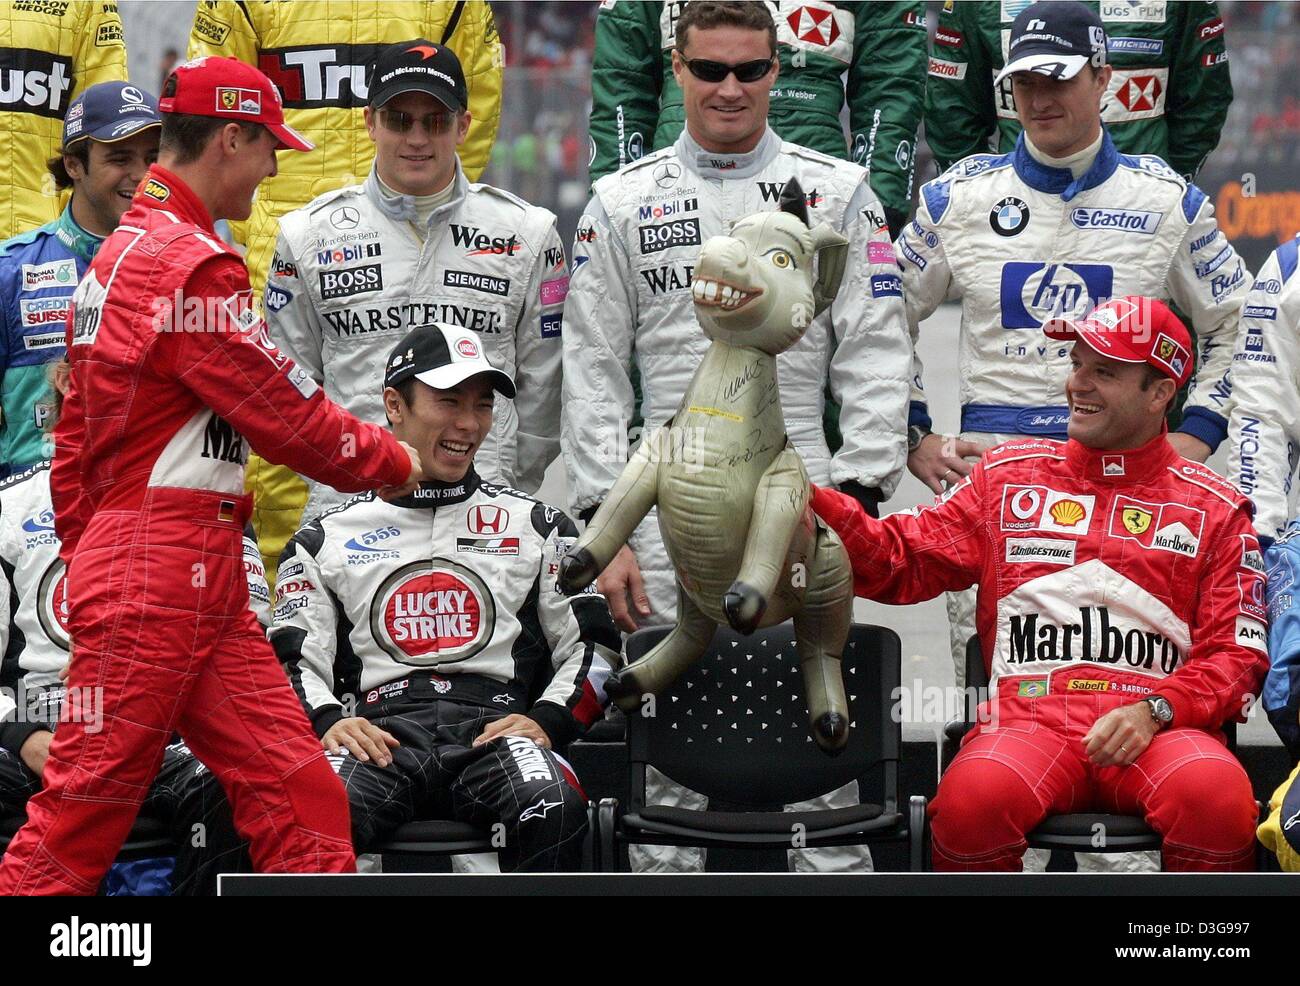 (dpa) -Ferrari's German Formula One world champion Michael Schumacher (L) arrives late as Formula One drivers pose for photographers prior to the start of the Brazilian Formula One Grand Prix at the Interlagos circuit in Sao Paulo, Brazil, Sunday 24 October 2004. Schumacher's Brazilian team mate Rubens Barrichello (R) holds an inflatable donkey from the 'Shrek' movie. Sitting in th Stock Photo